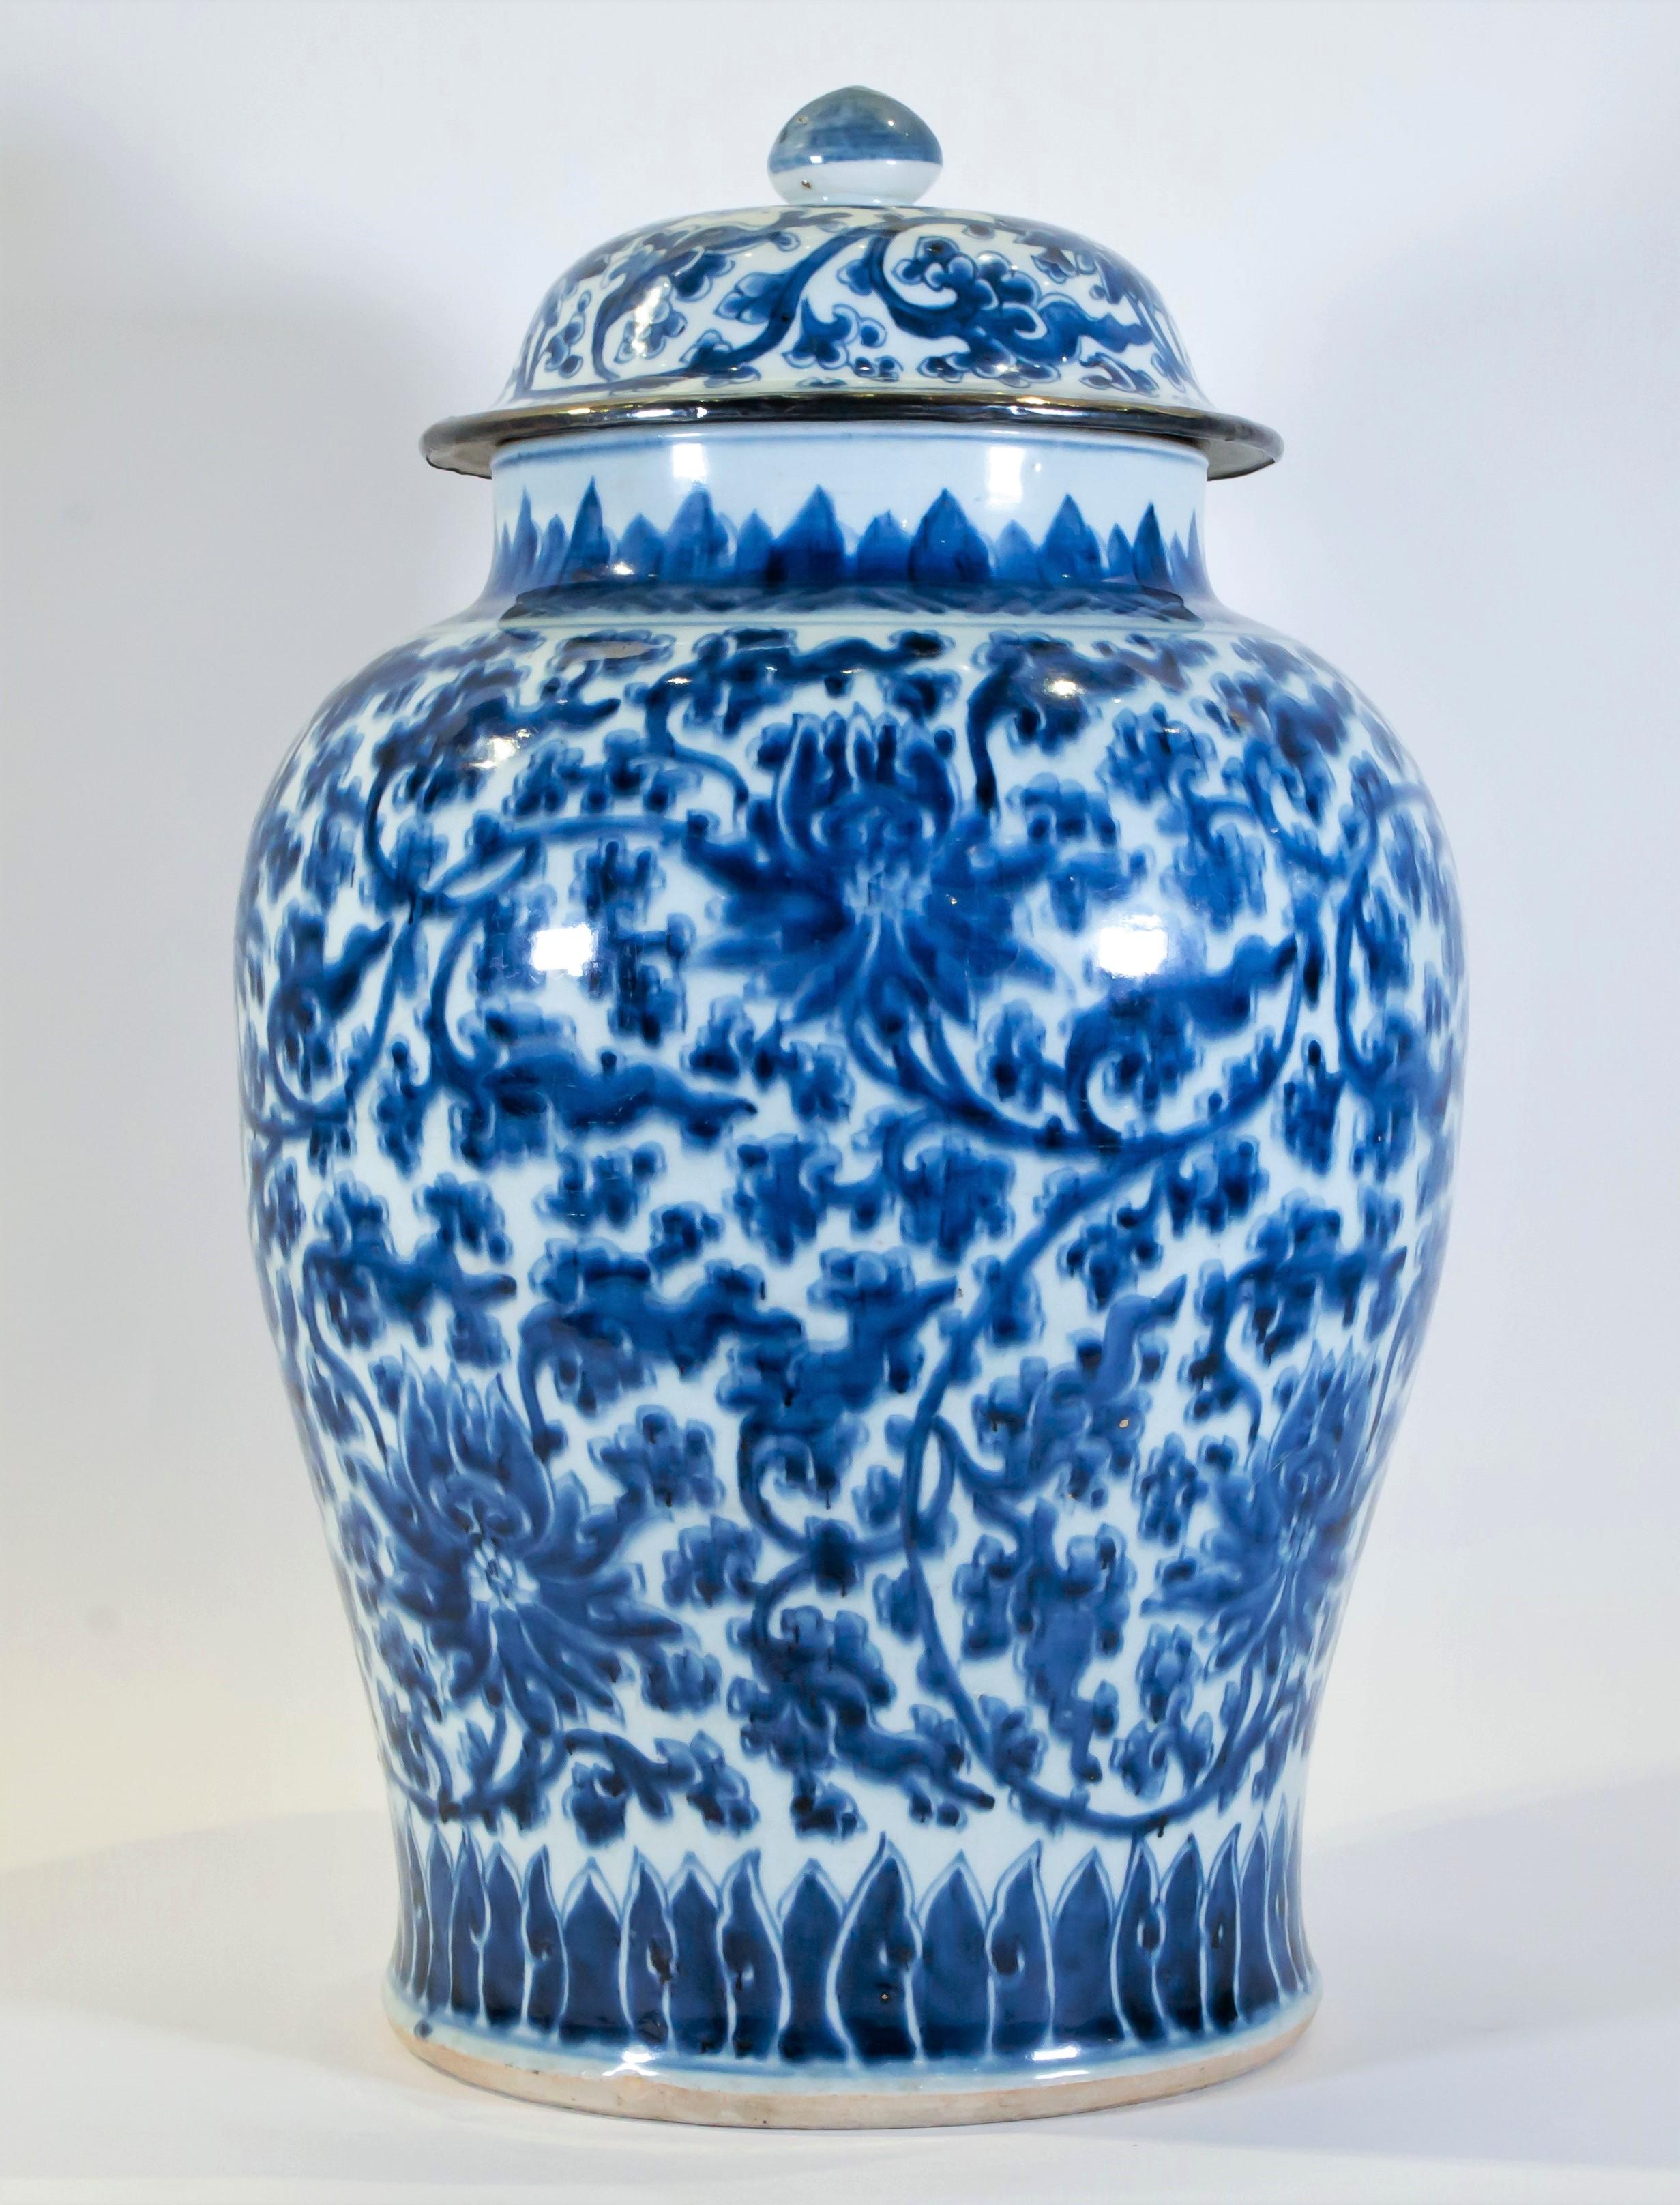 A Large 18th Century Chinese Blue and White Kangxi Period Porcelain Covered Vase/Jar. Of baluster form this covered vase is truly exceptional in quality, condition and size. The body is beautifully decorated with hand-painted chrysanthemum flowers